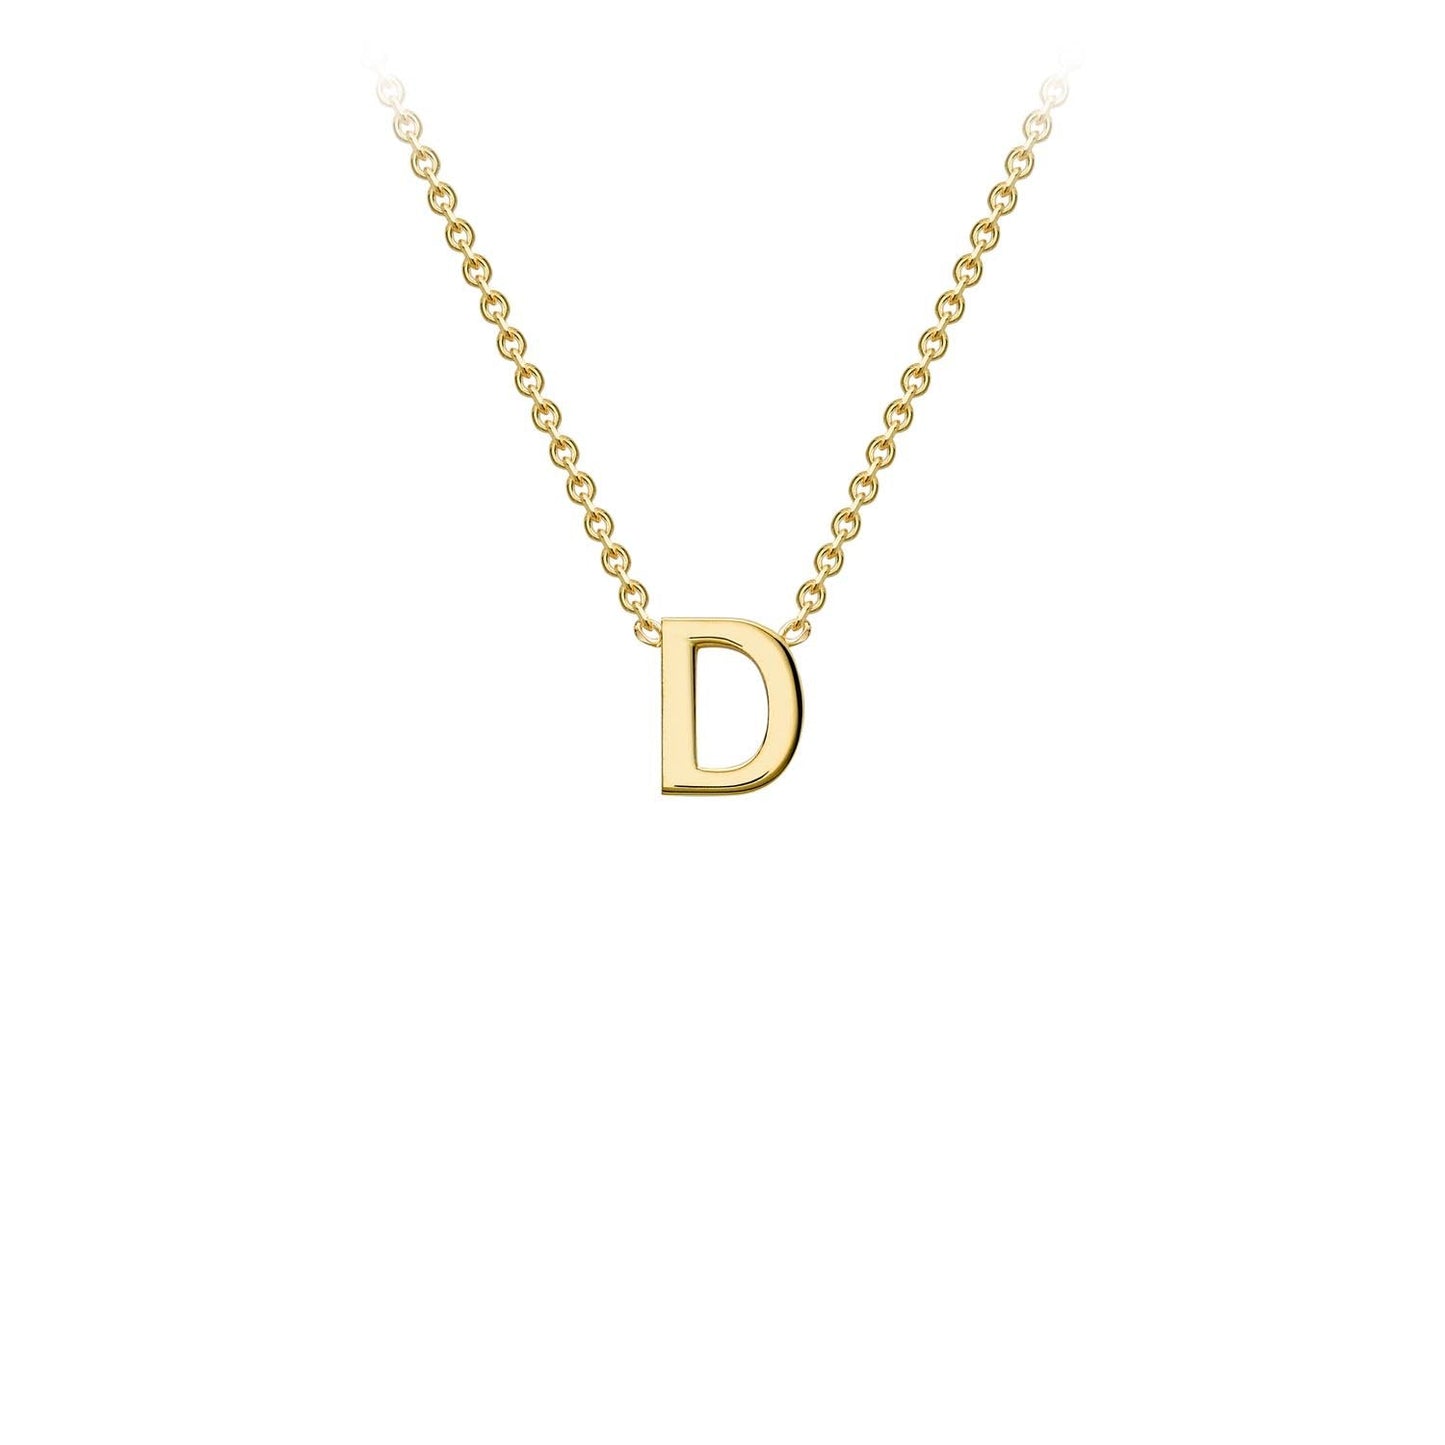 9K Yellow Gold 'D' Initial Adjustable Letter Necklace 38/43cm